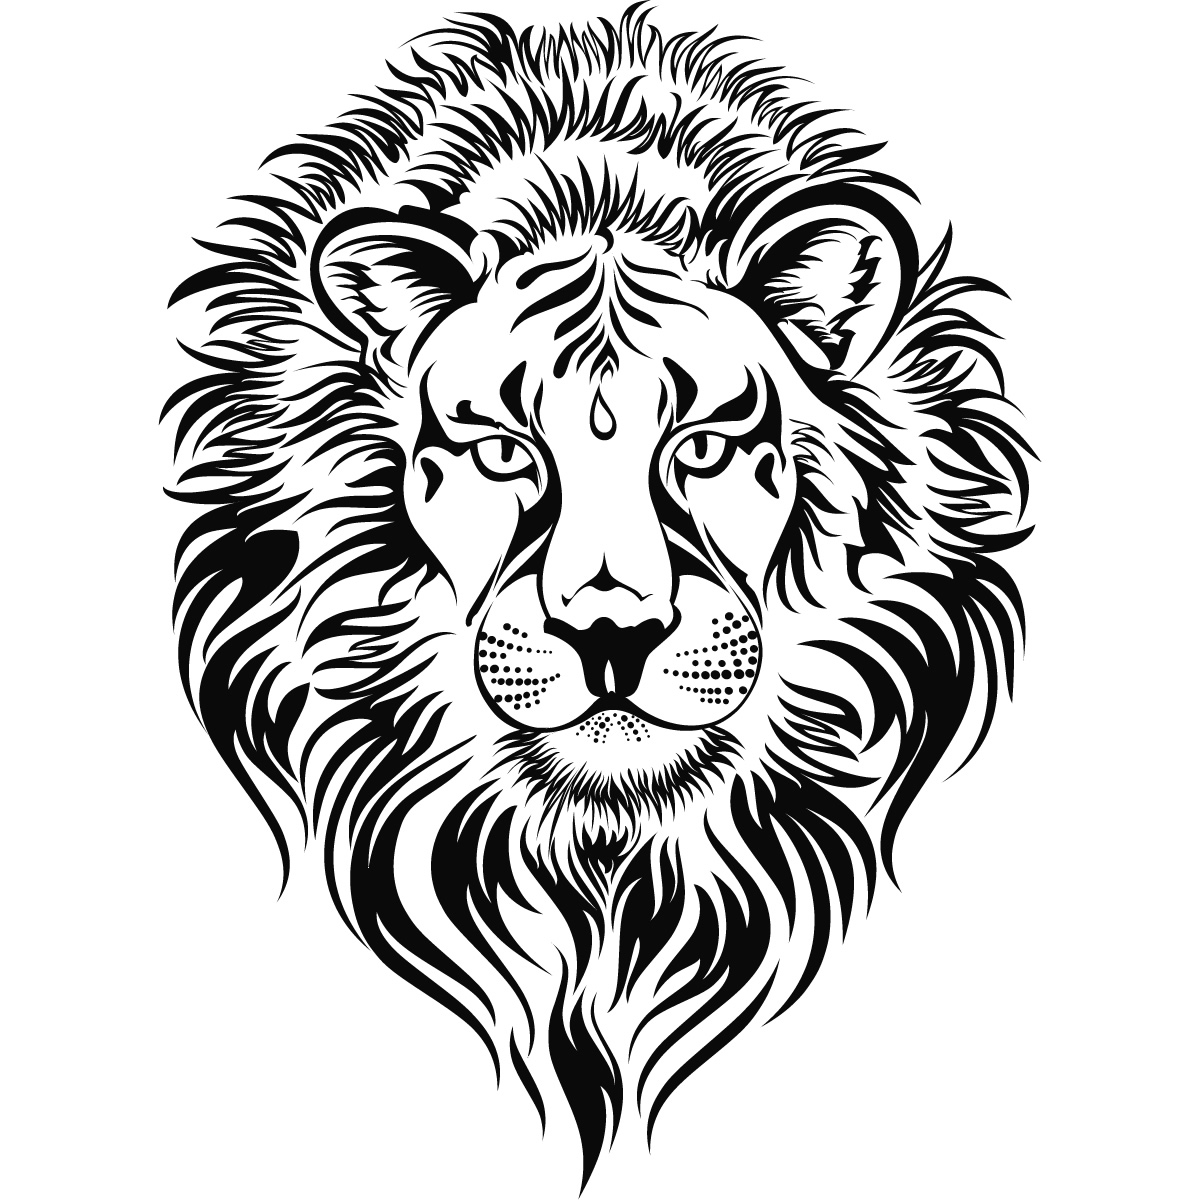 Nila Tattoos - A blend of a vicious lion 🦁 face and... | Facebook